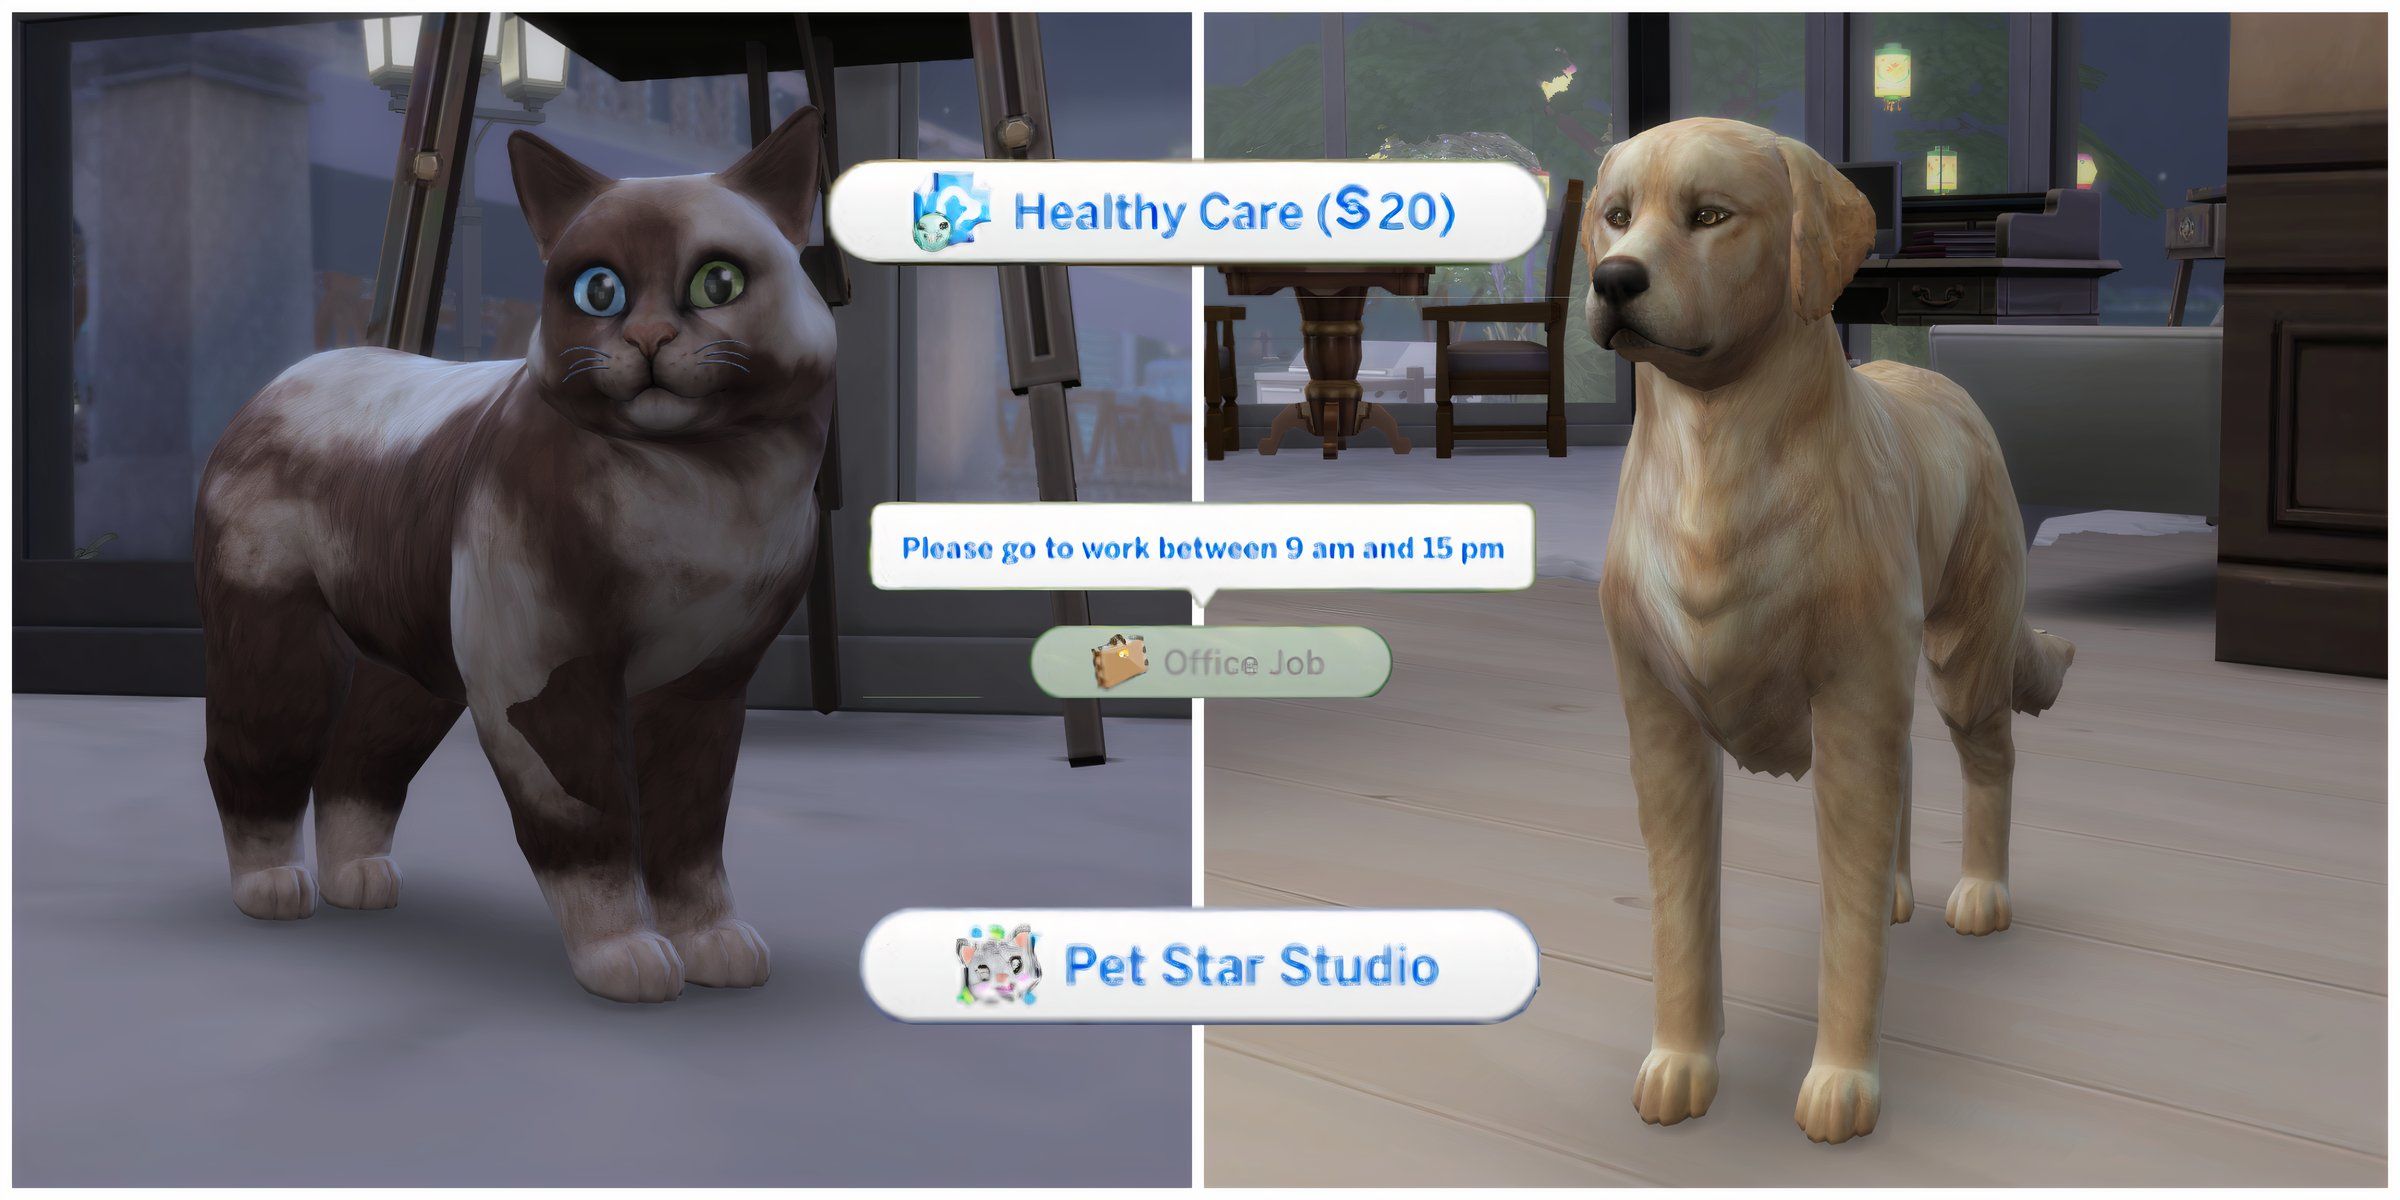 New rabbit hole experiences from the Pet Assignments And Jobs mod, including an office job, healthy care, and the pet star studio